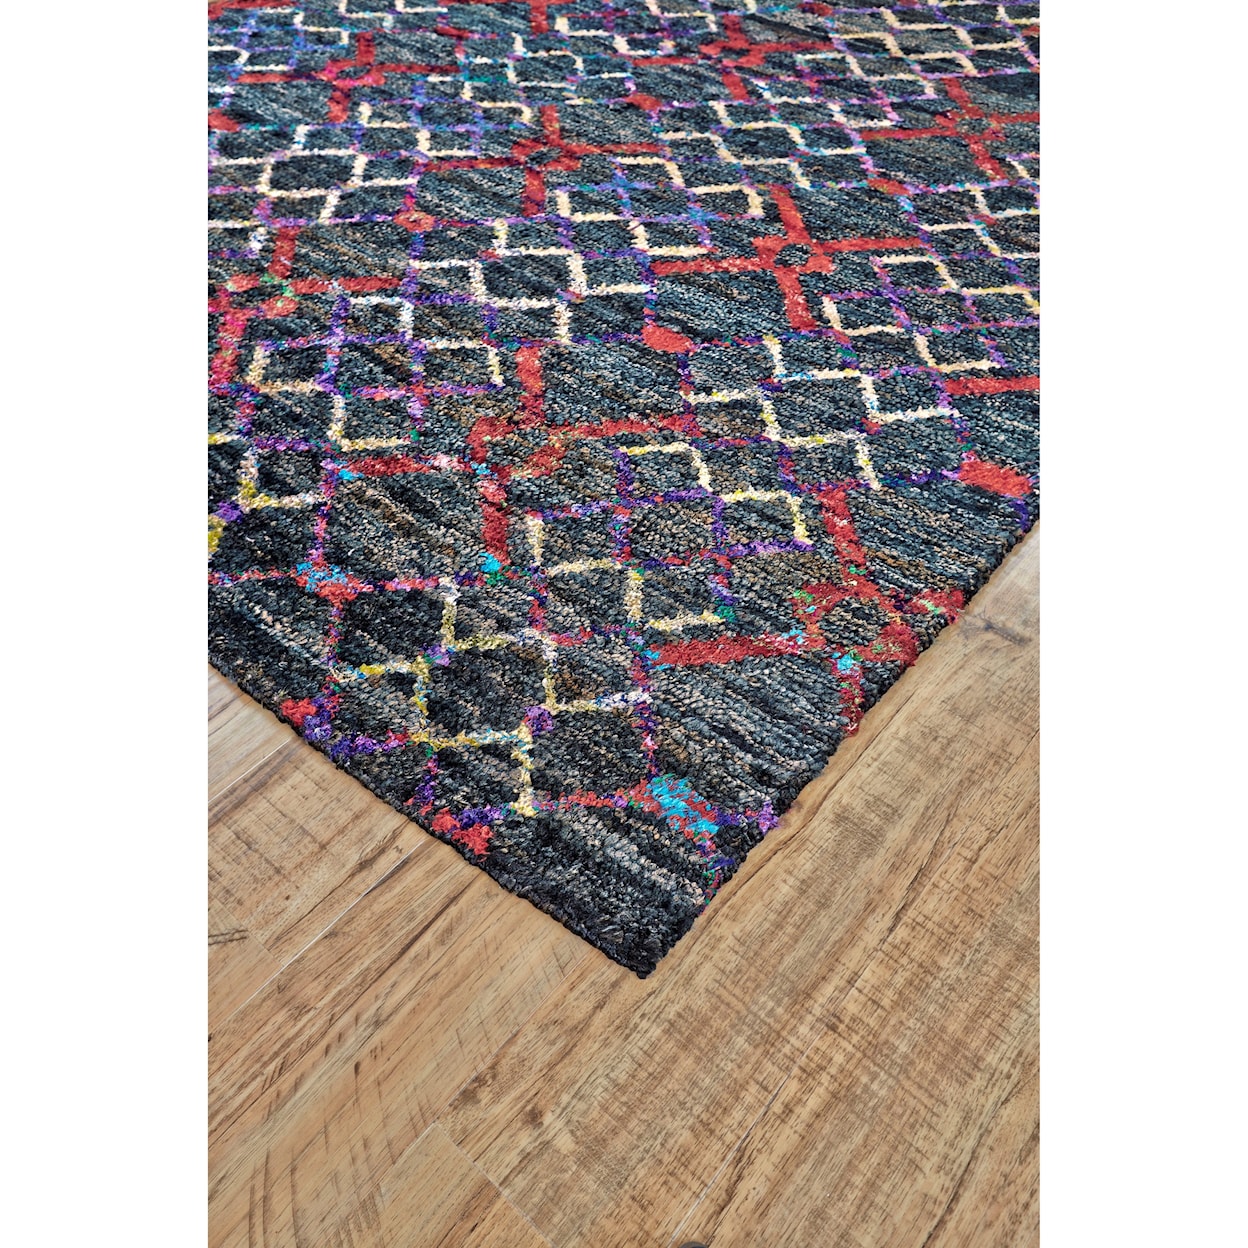 Feizy Rugs Tortola Flame 4' x 6' Area Rug